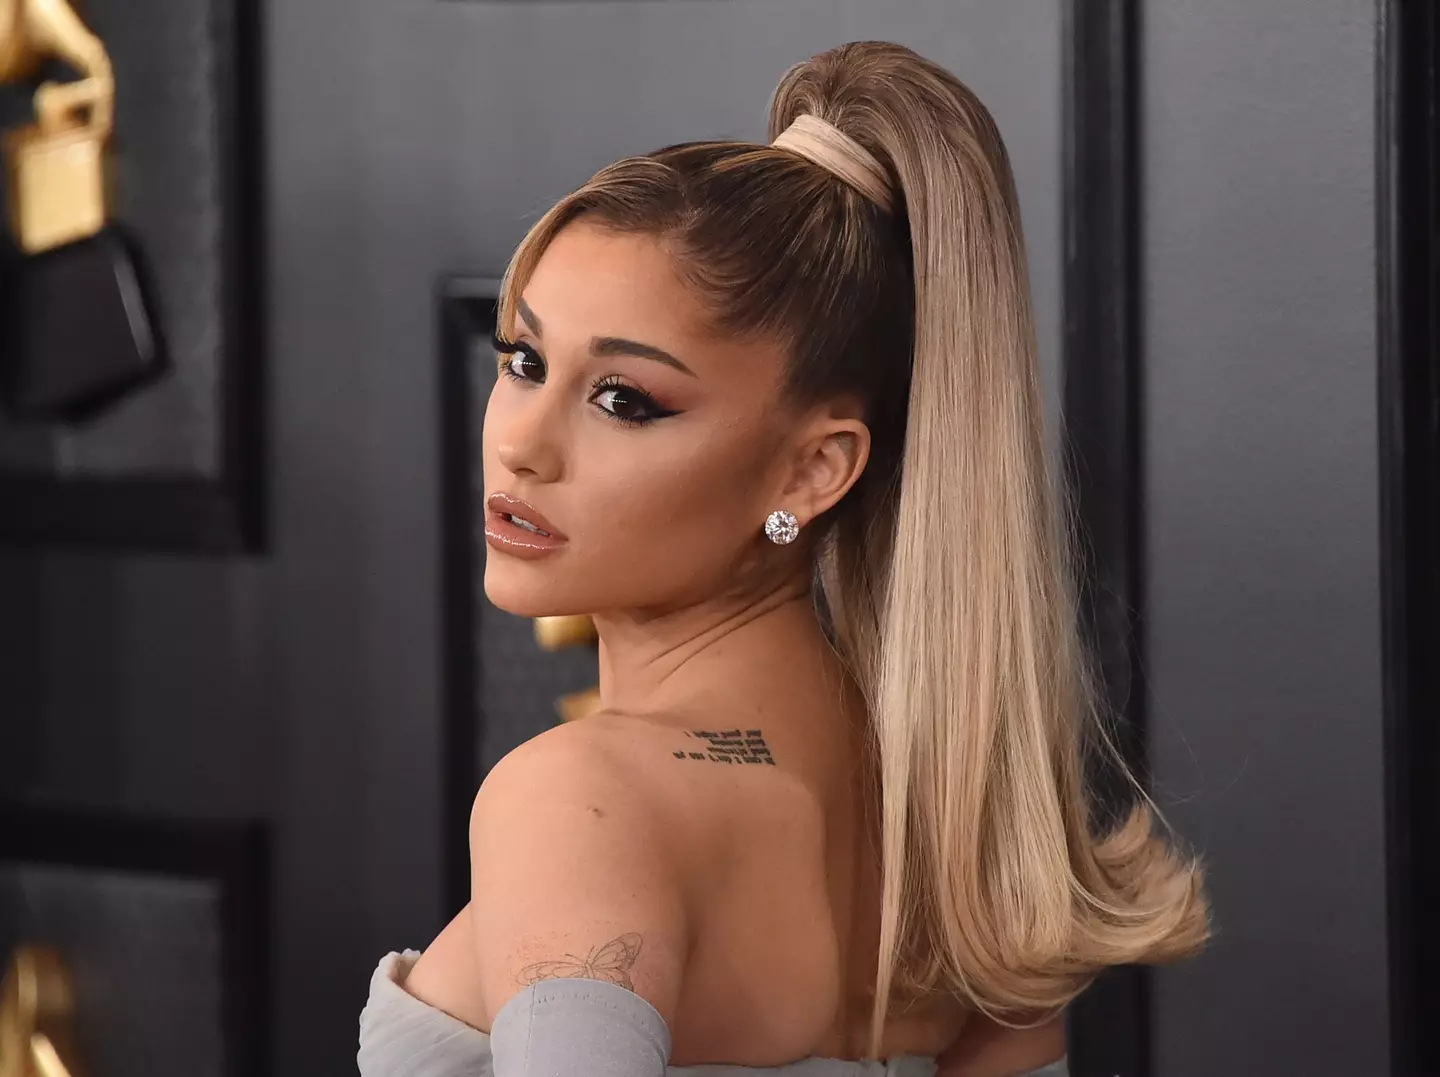 A viral TikTok is showing the evolution of Ariana Grande's voice.